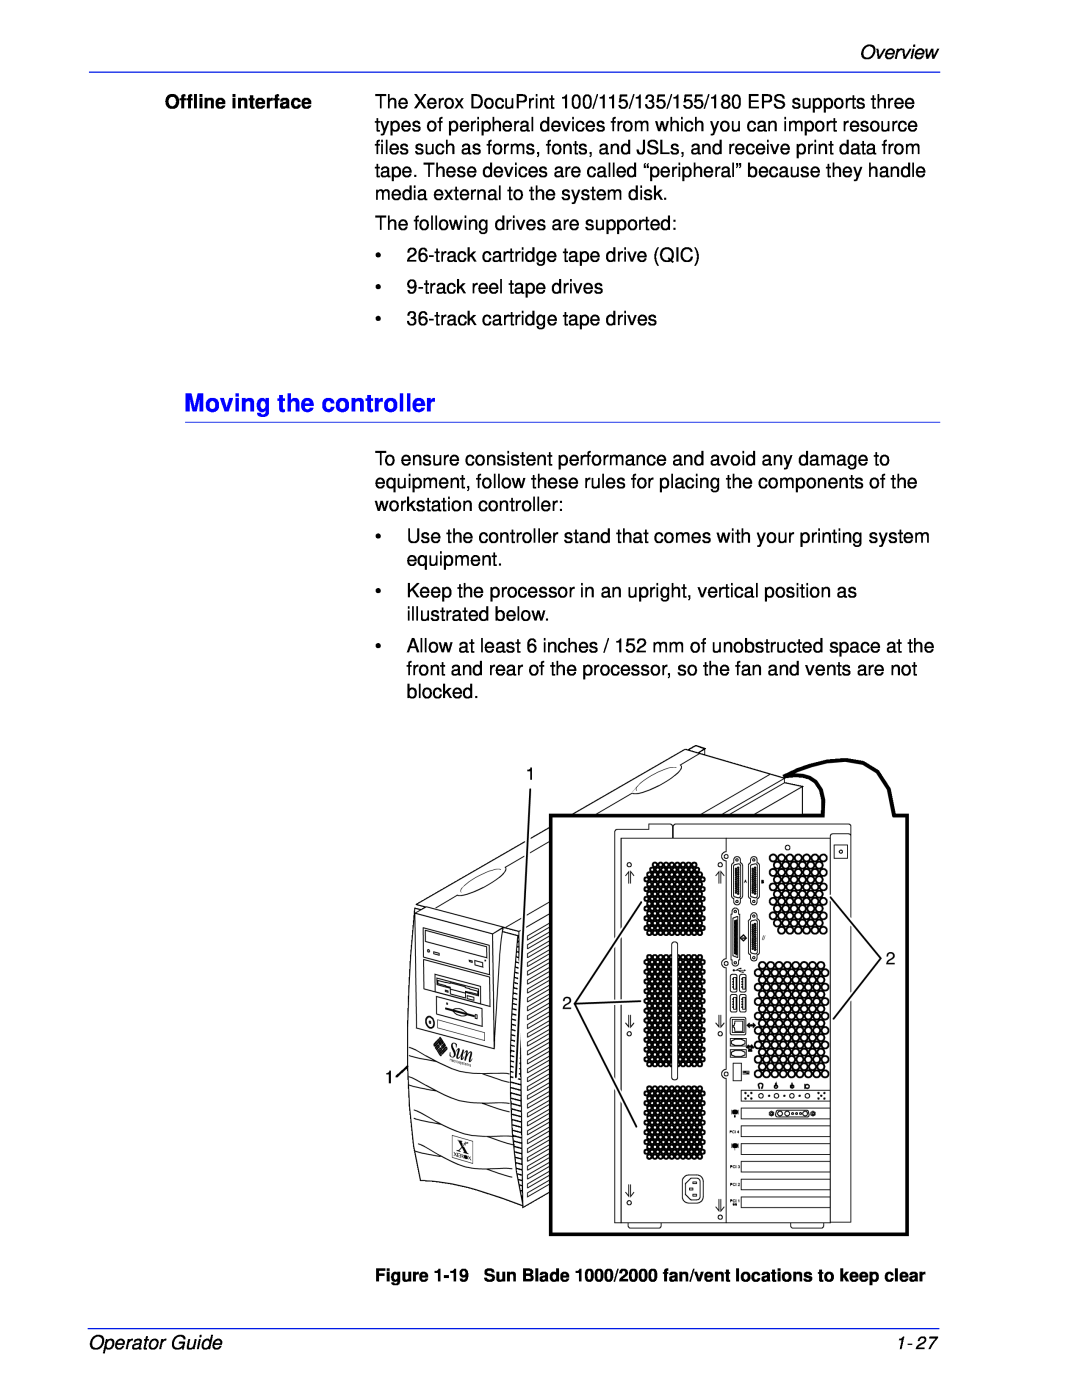 Xerox 180 EPS, 100 manual Moving the controller, Overview, Operator Guide 